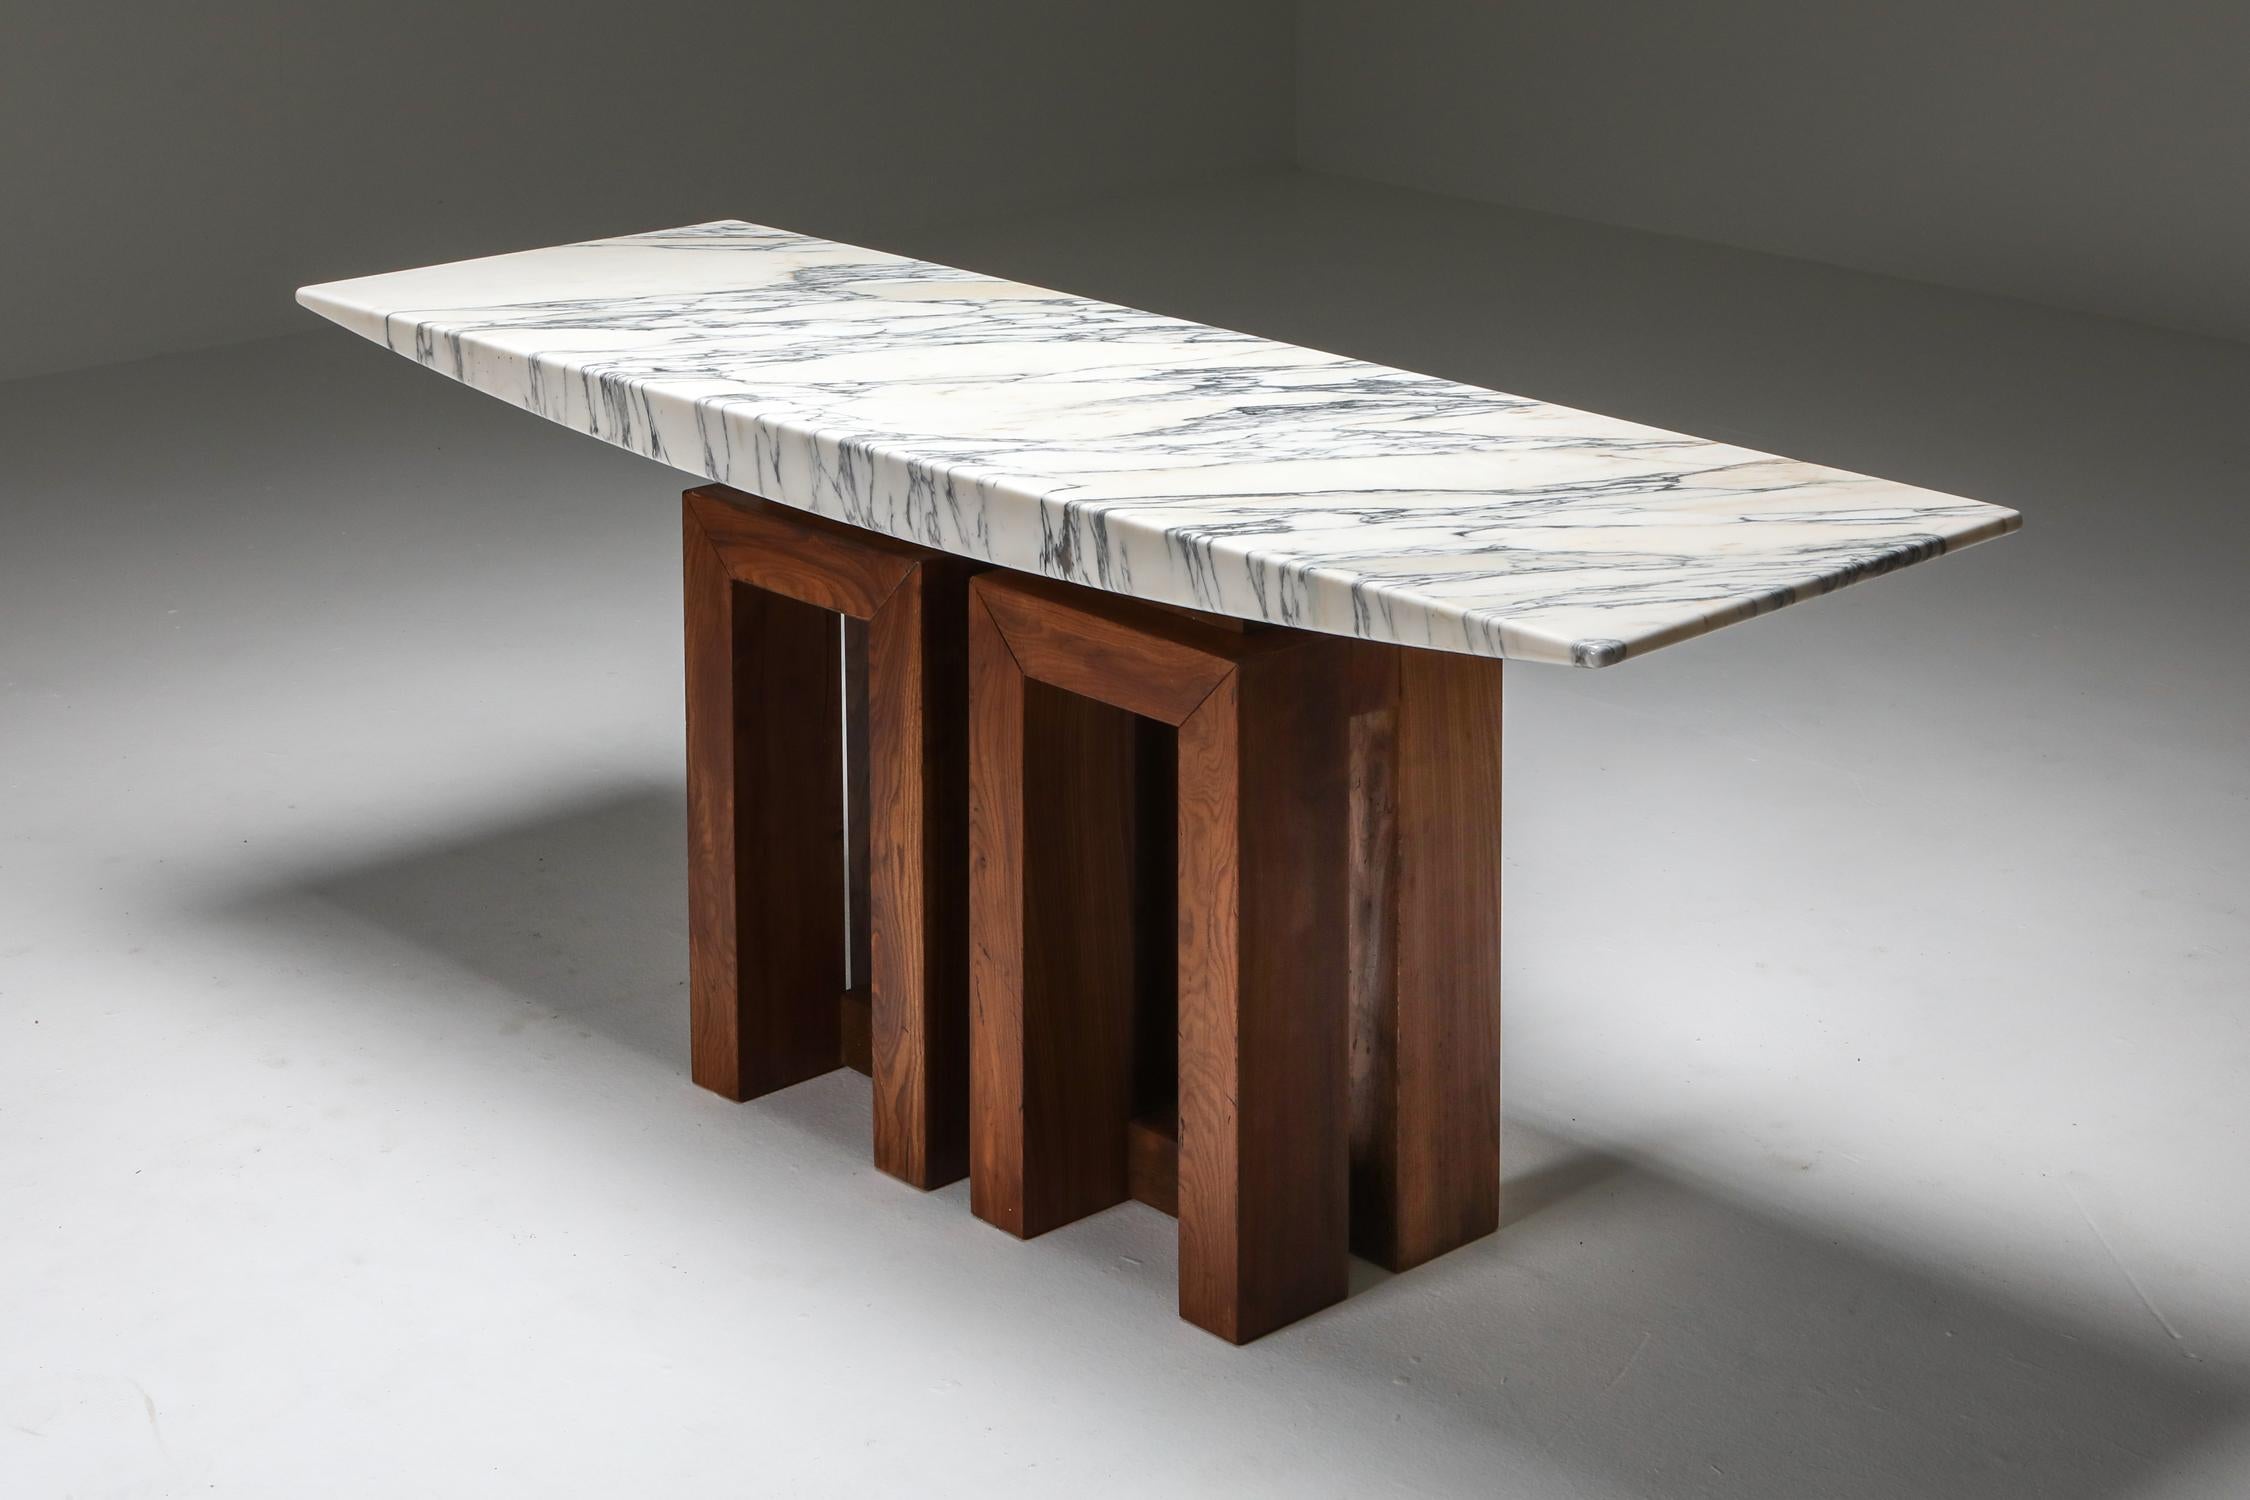 Console table in marble and walnut, Pierluigi Spadolini, circa 1965, Italy

Fior di pesco marble, walnut.
Recently a similar piece sold at Phillips auctions
Pierluigi Spadolini (1922-2000)

Pierluigi Spadolini (April 1922, Florence–June 2000,